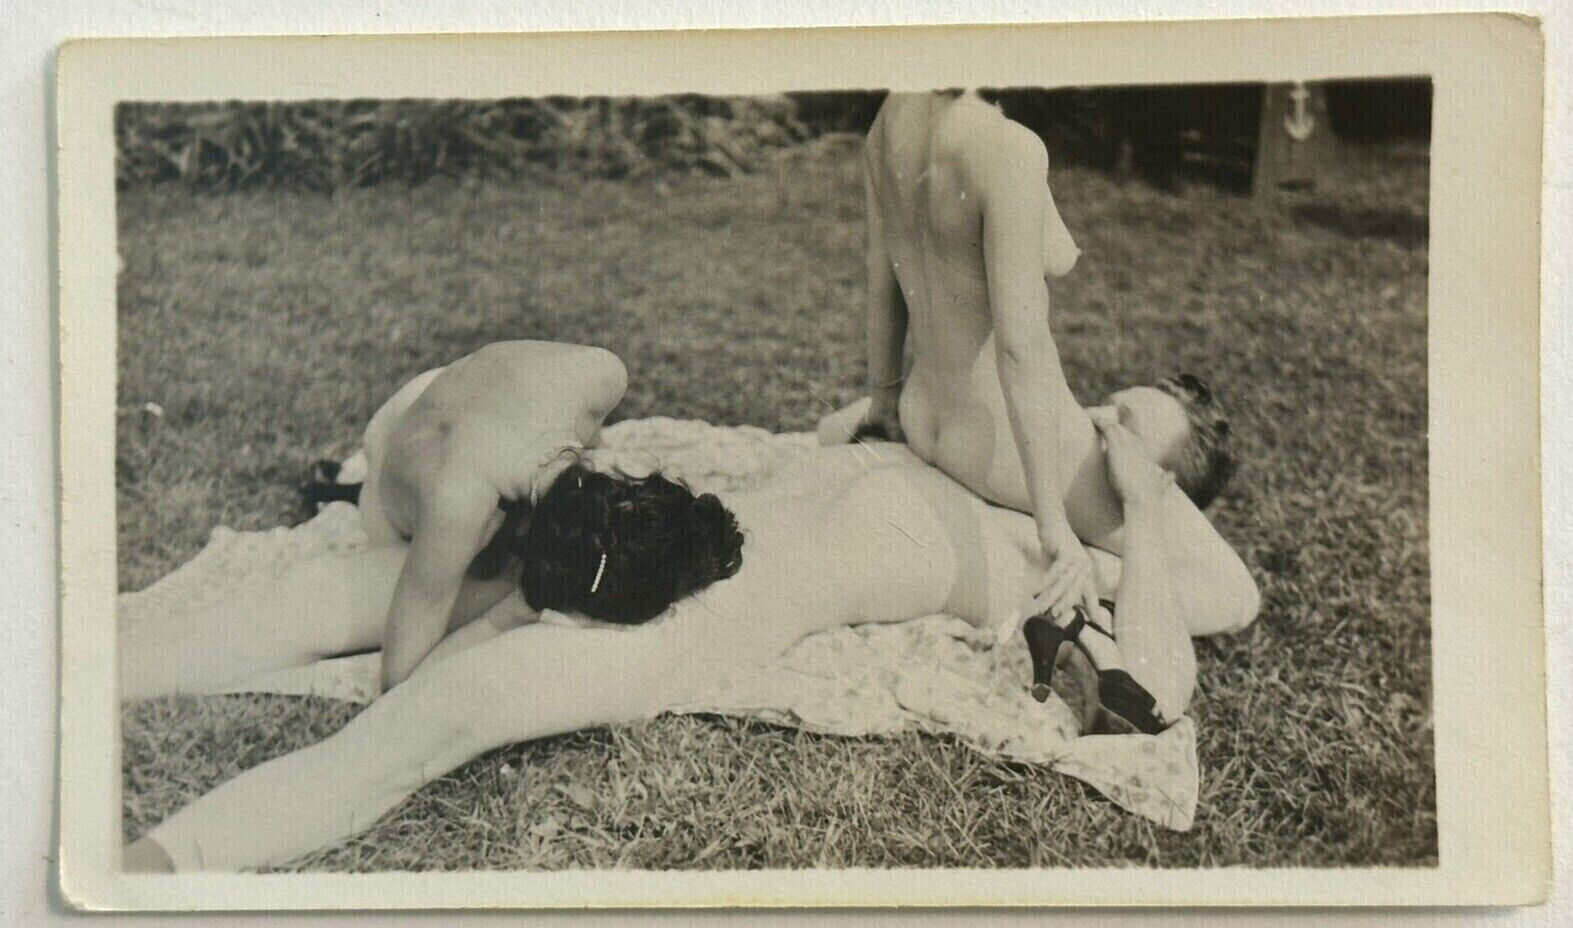 2 Girls 1 Guy Threesome - Naked BJ Oral Sex Vintage Victorian Photo EXPLICIT